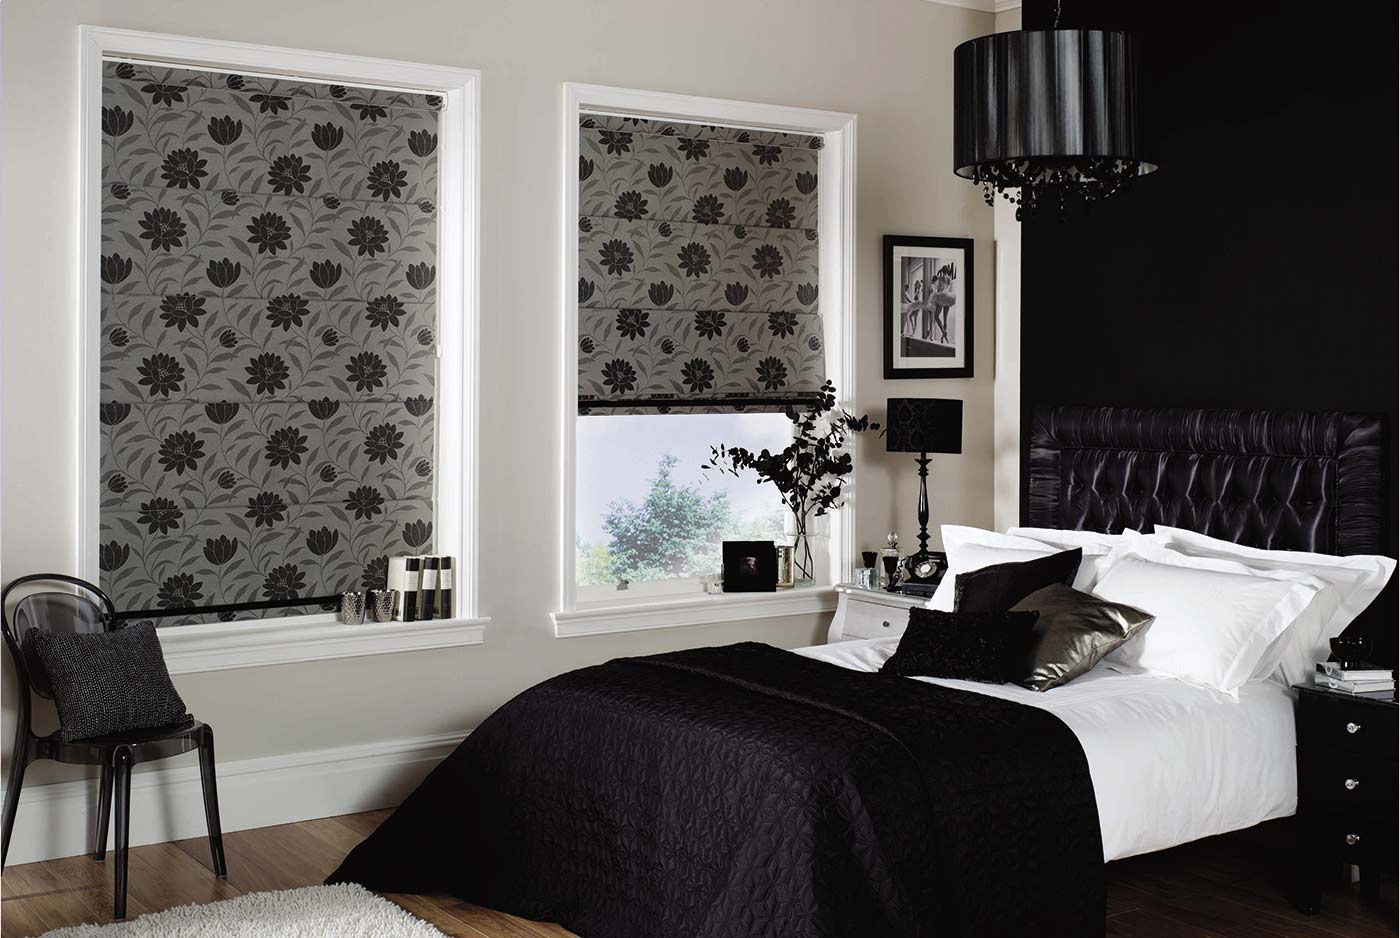 Choose Beautiful Bedroom Blinds In Leigh That Coordinate With Your Decor